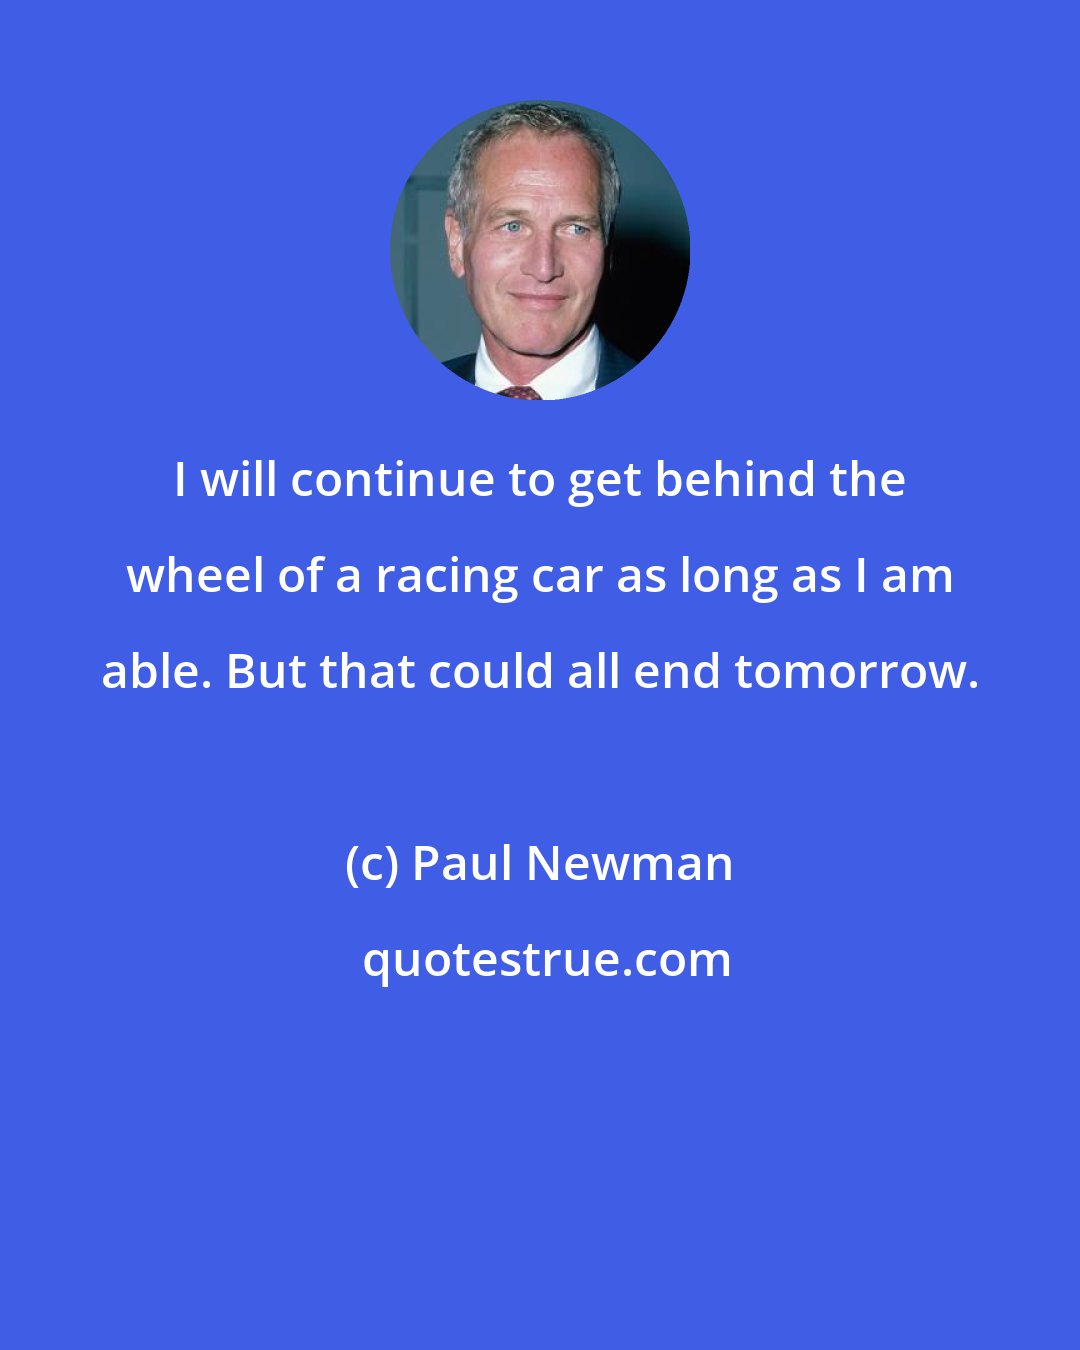 Paul Newman: I will continue to get behind the wheel of a racing car as long as I am able. But that could all end tomorrow.